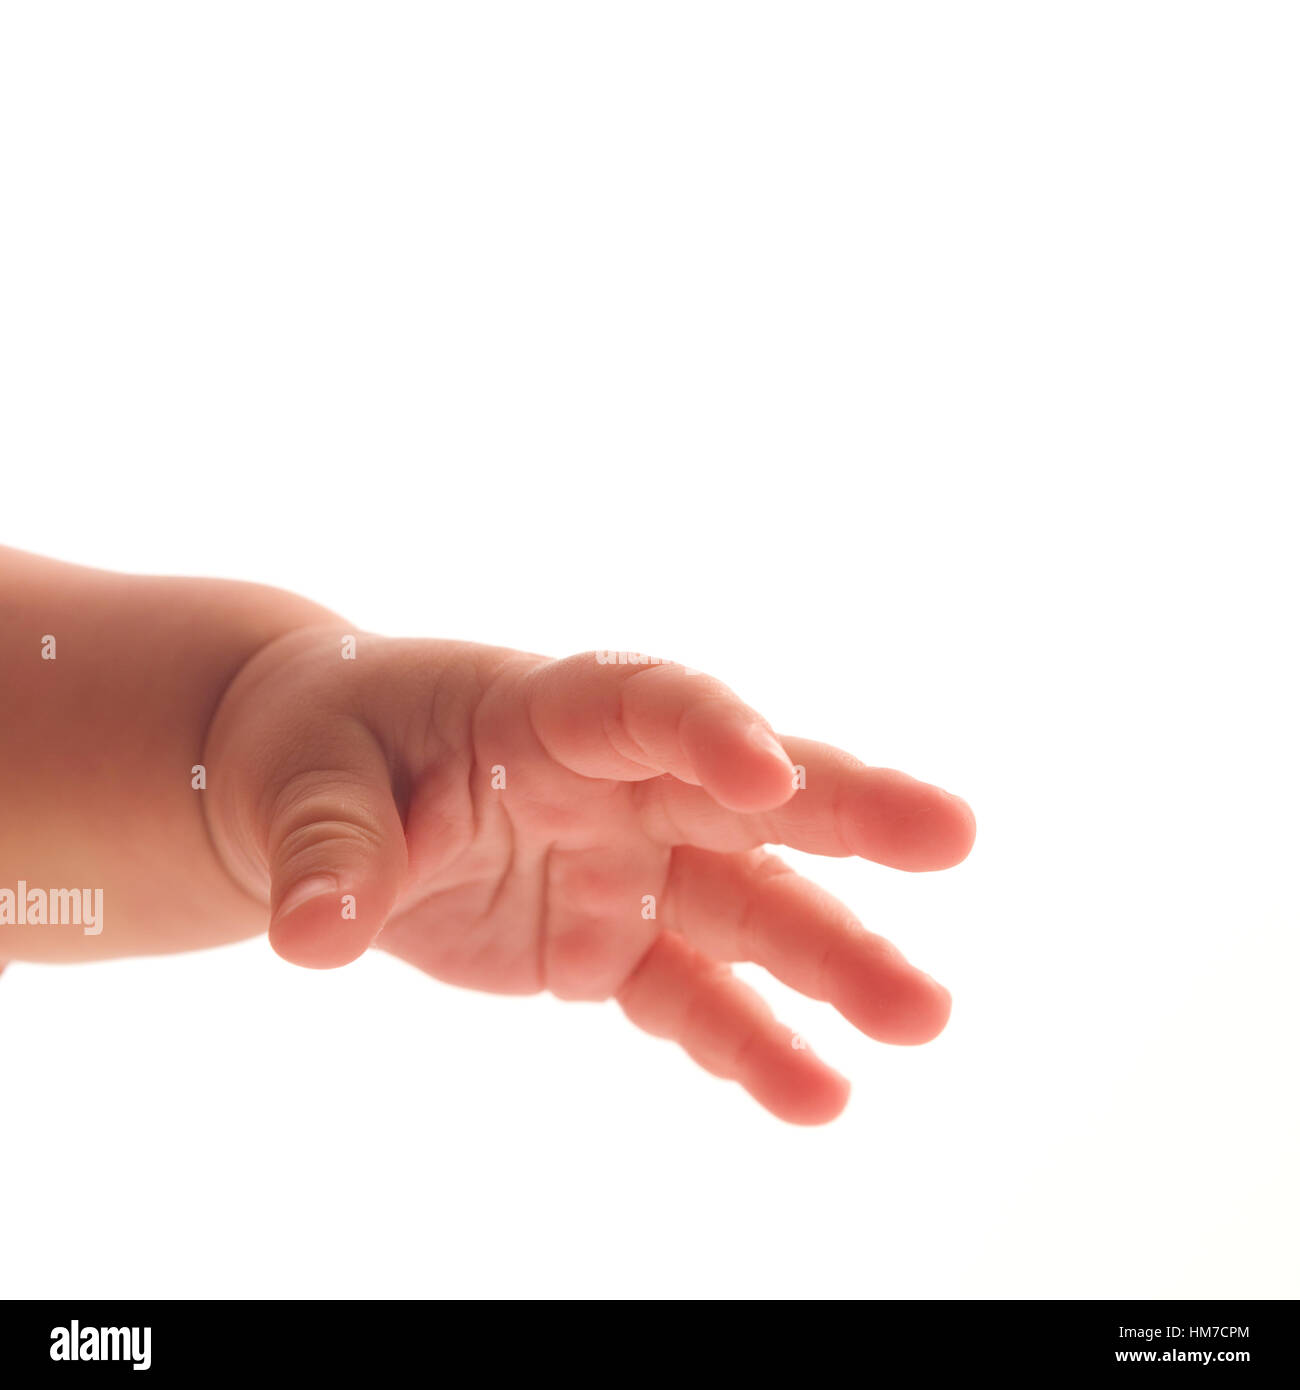 Hand of baby (6-11 months) on white background Stock Photo